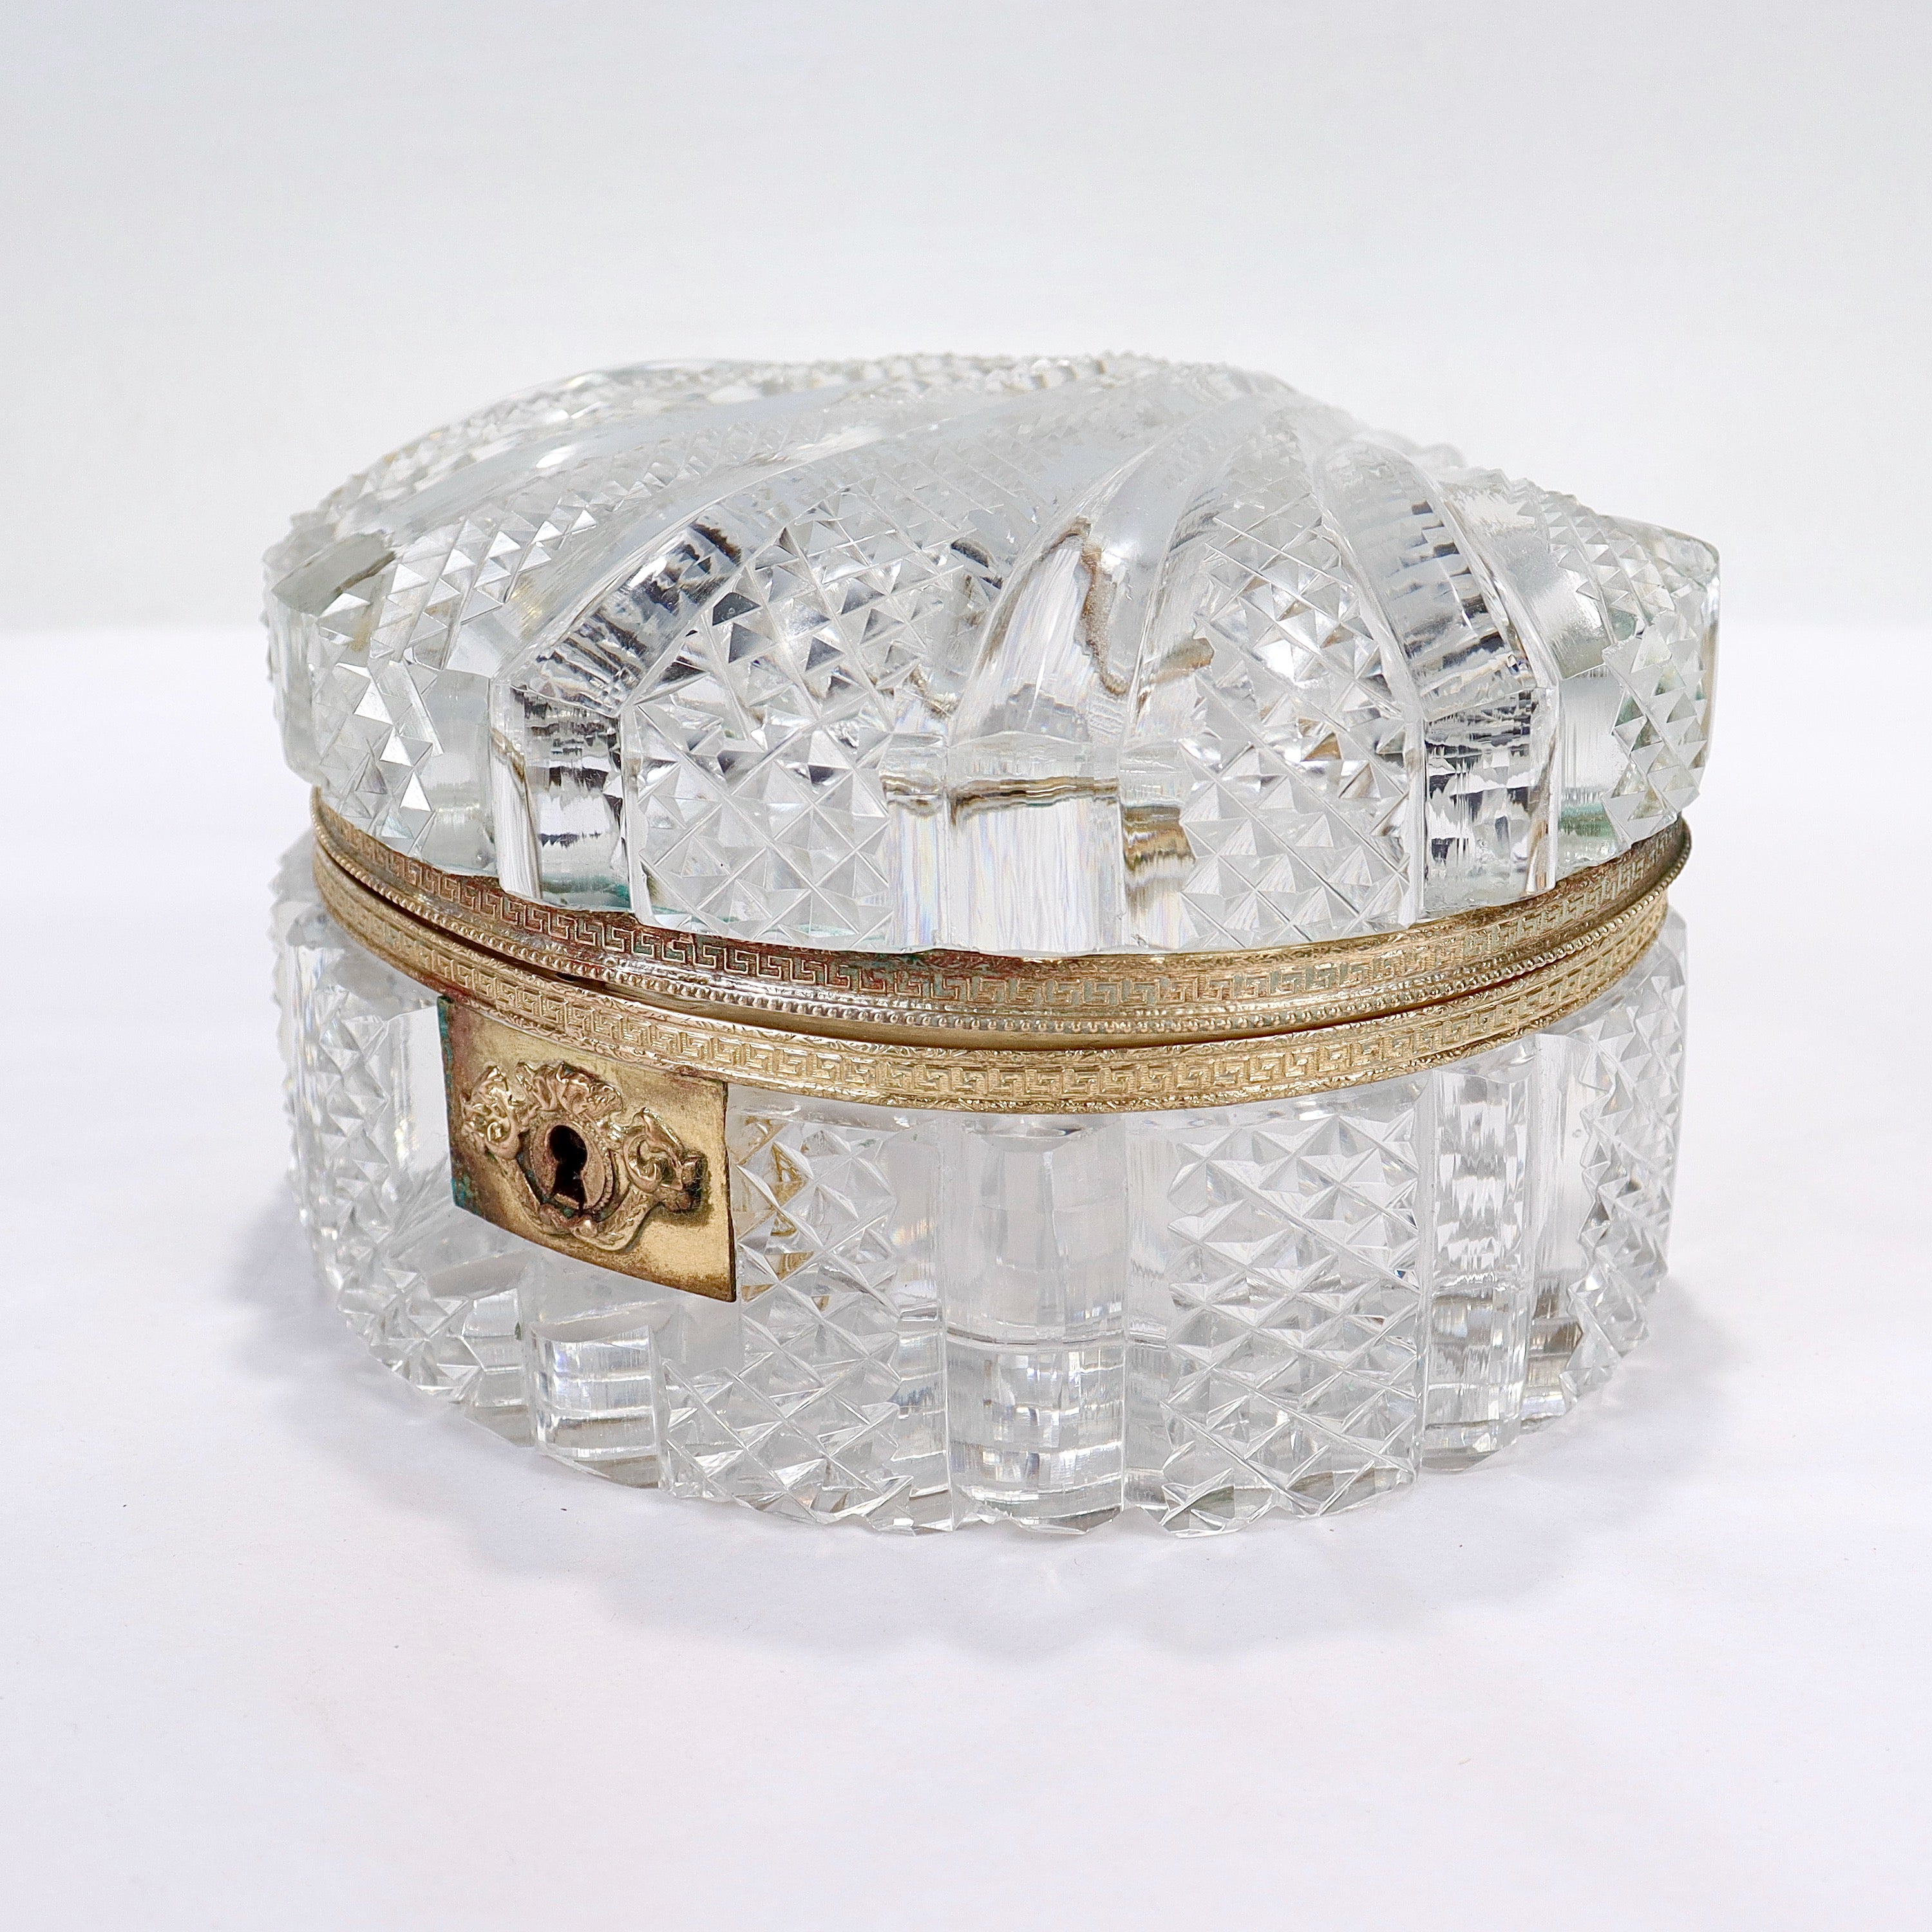 A fine antique French cut glass casket.

In the Charles X style.

In the form of a seashell with a bronze mounted lid.

Simply a great French cut glass casket!

Date:
Late 19th or Early 20th Century

Overall Condition:
It is in overall